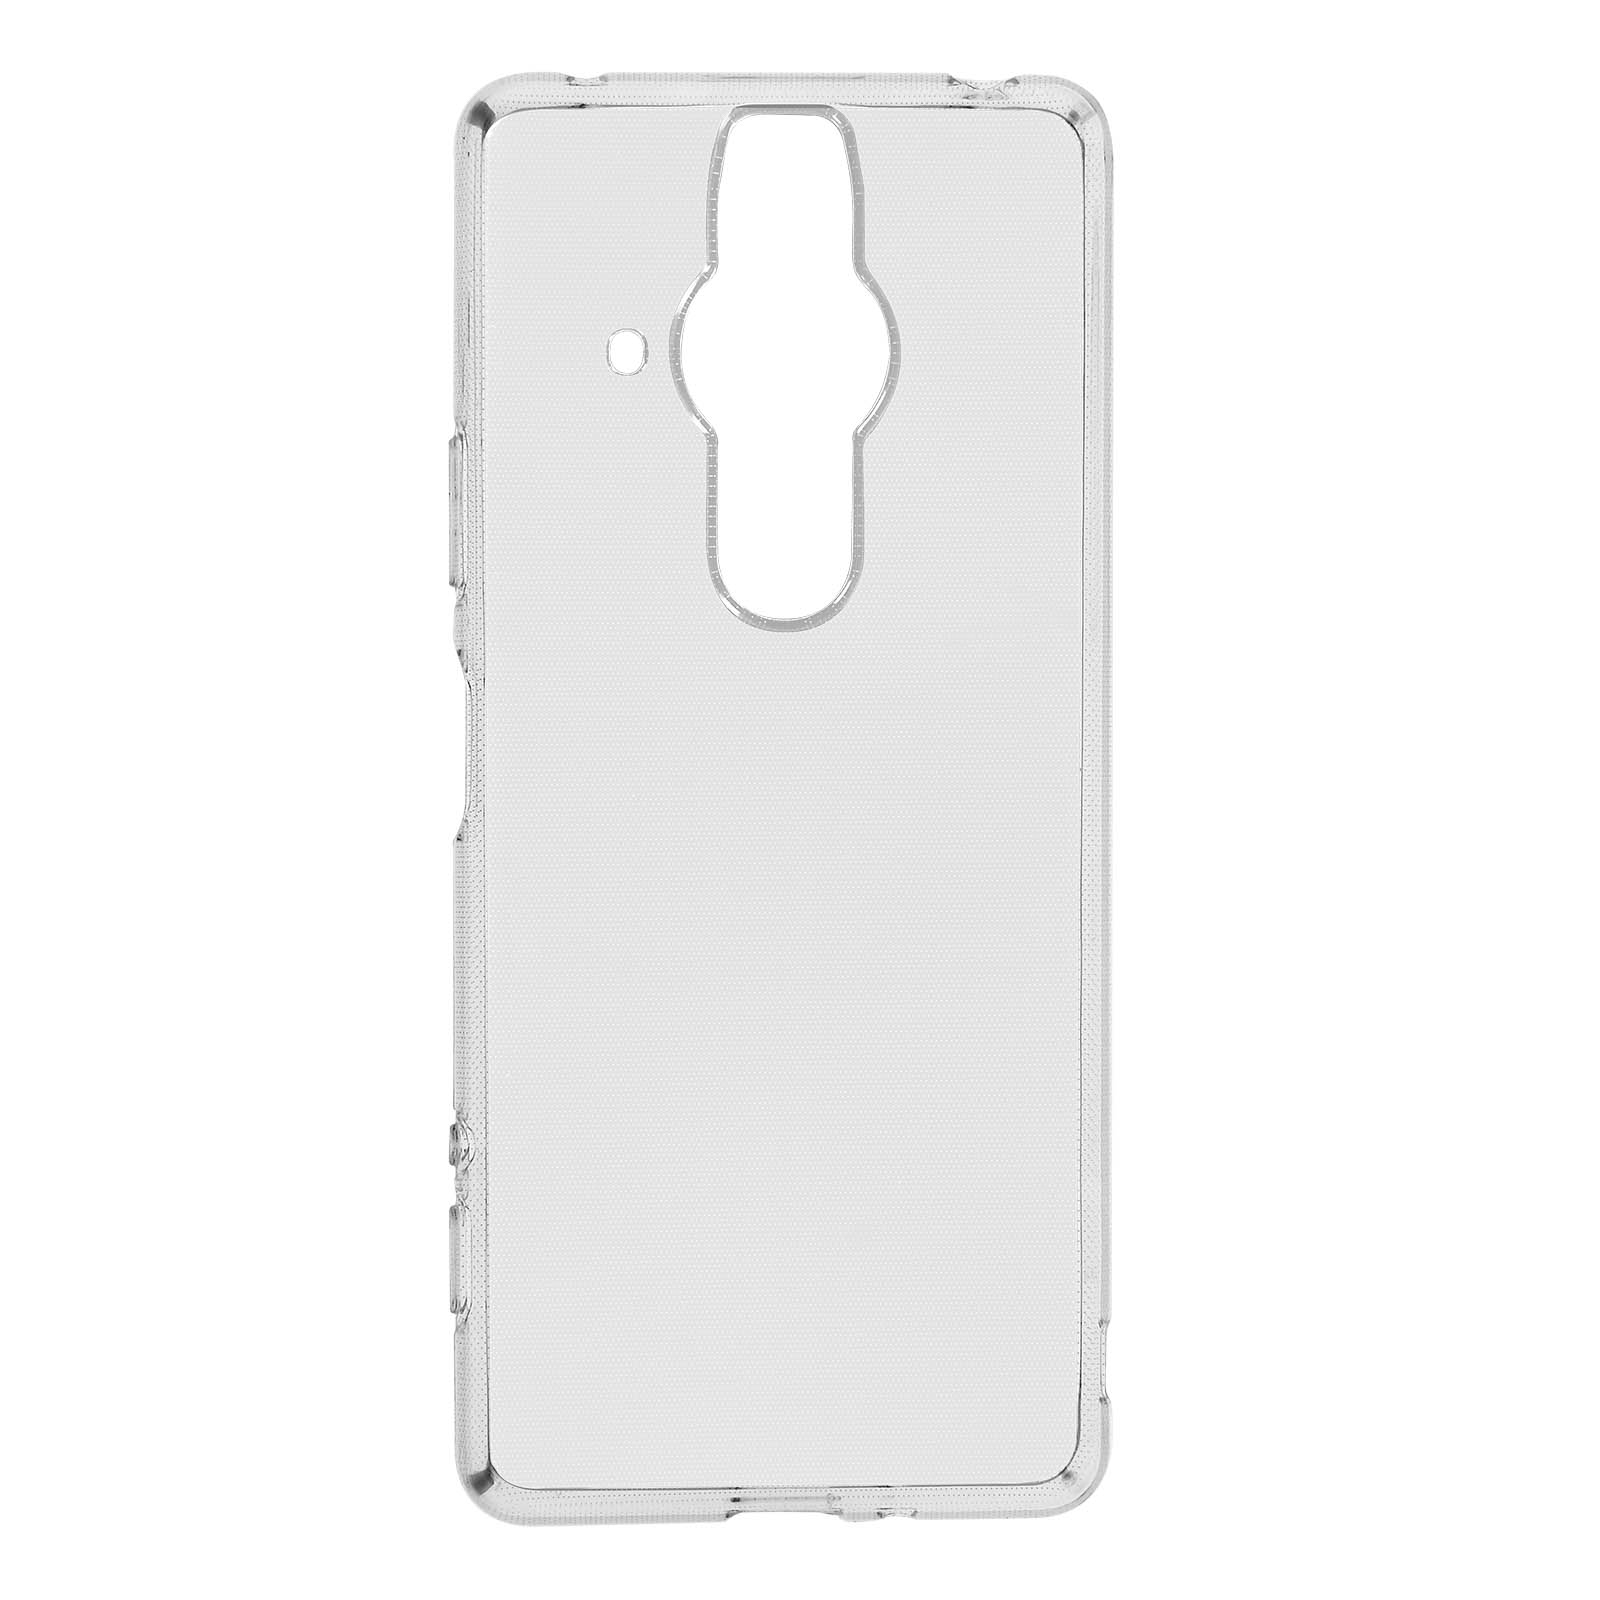 Transparent AVIZAR Series, Uclear Pro-I, Backcover, Xperia Sony,